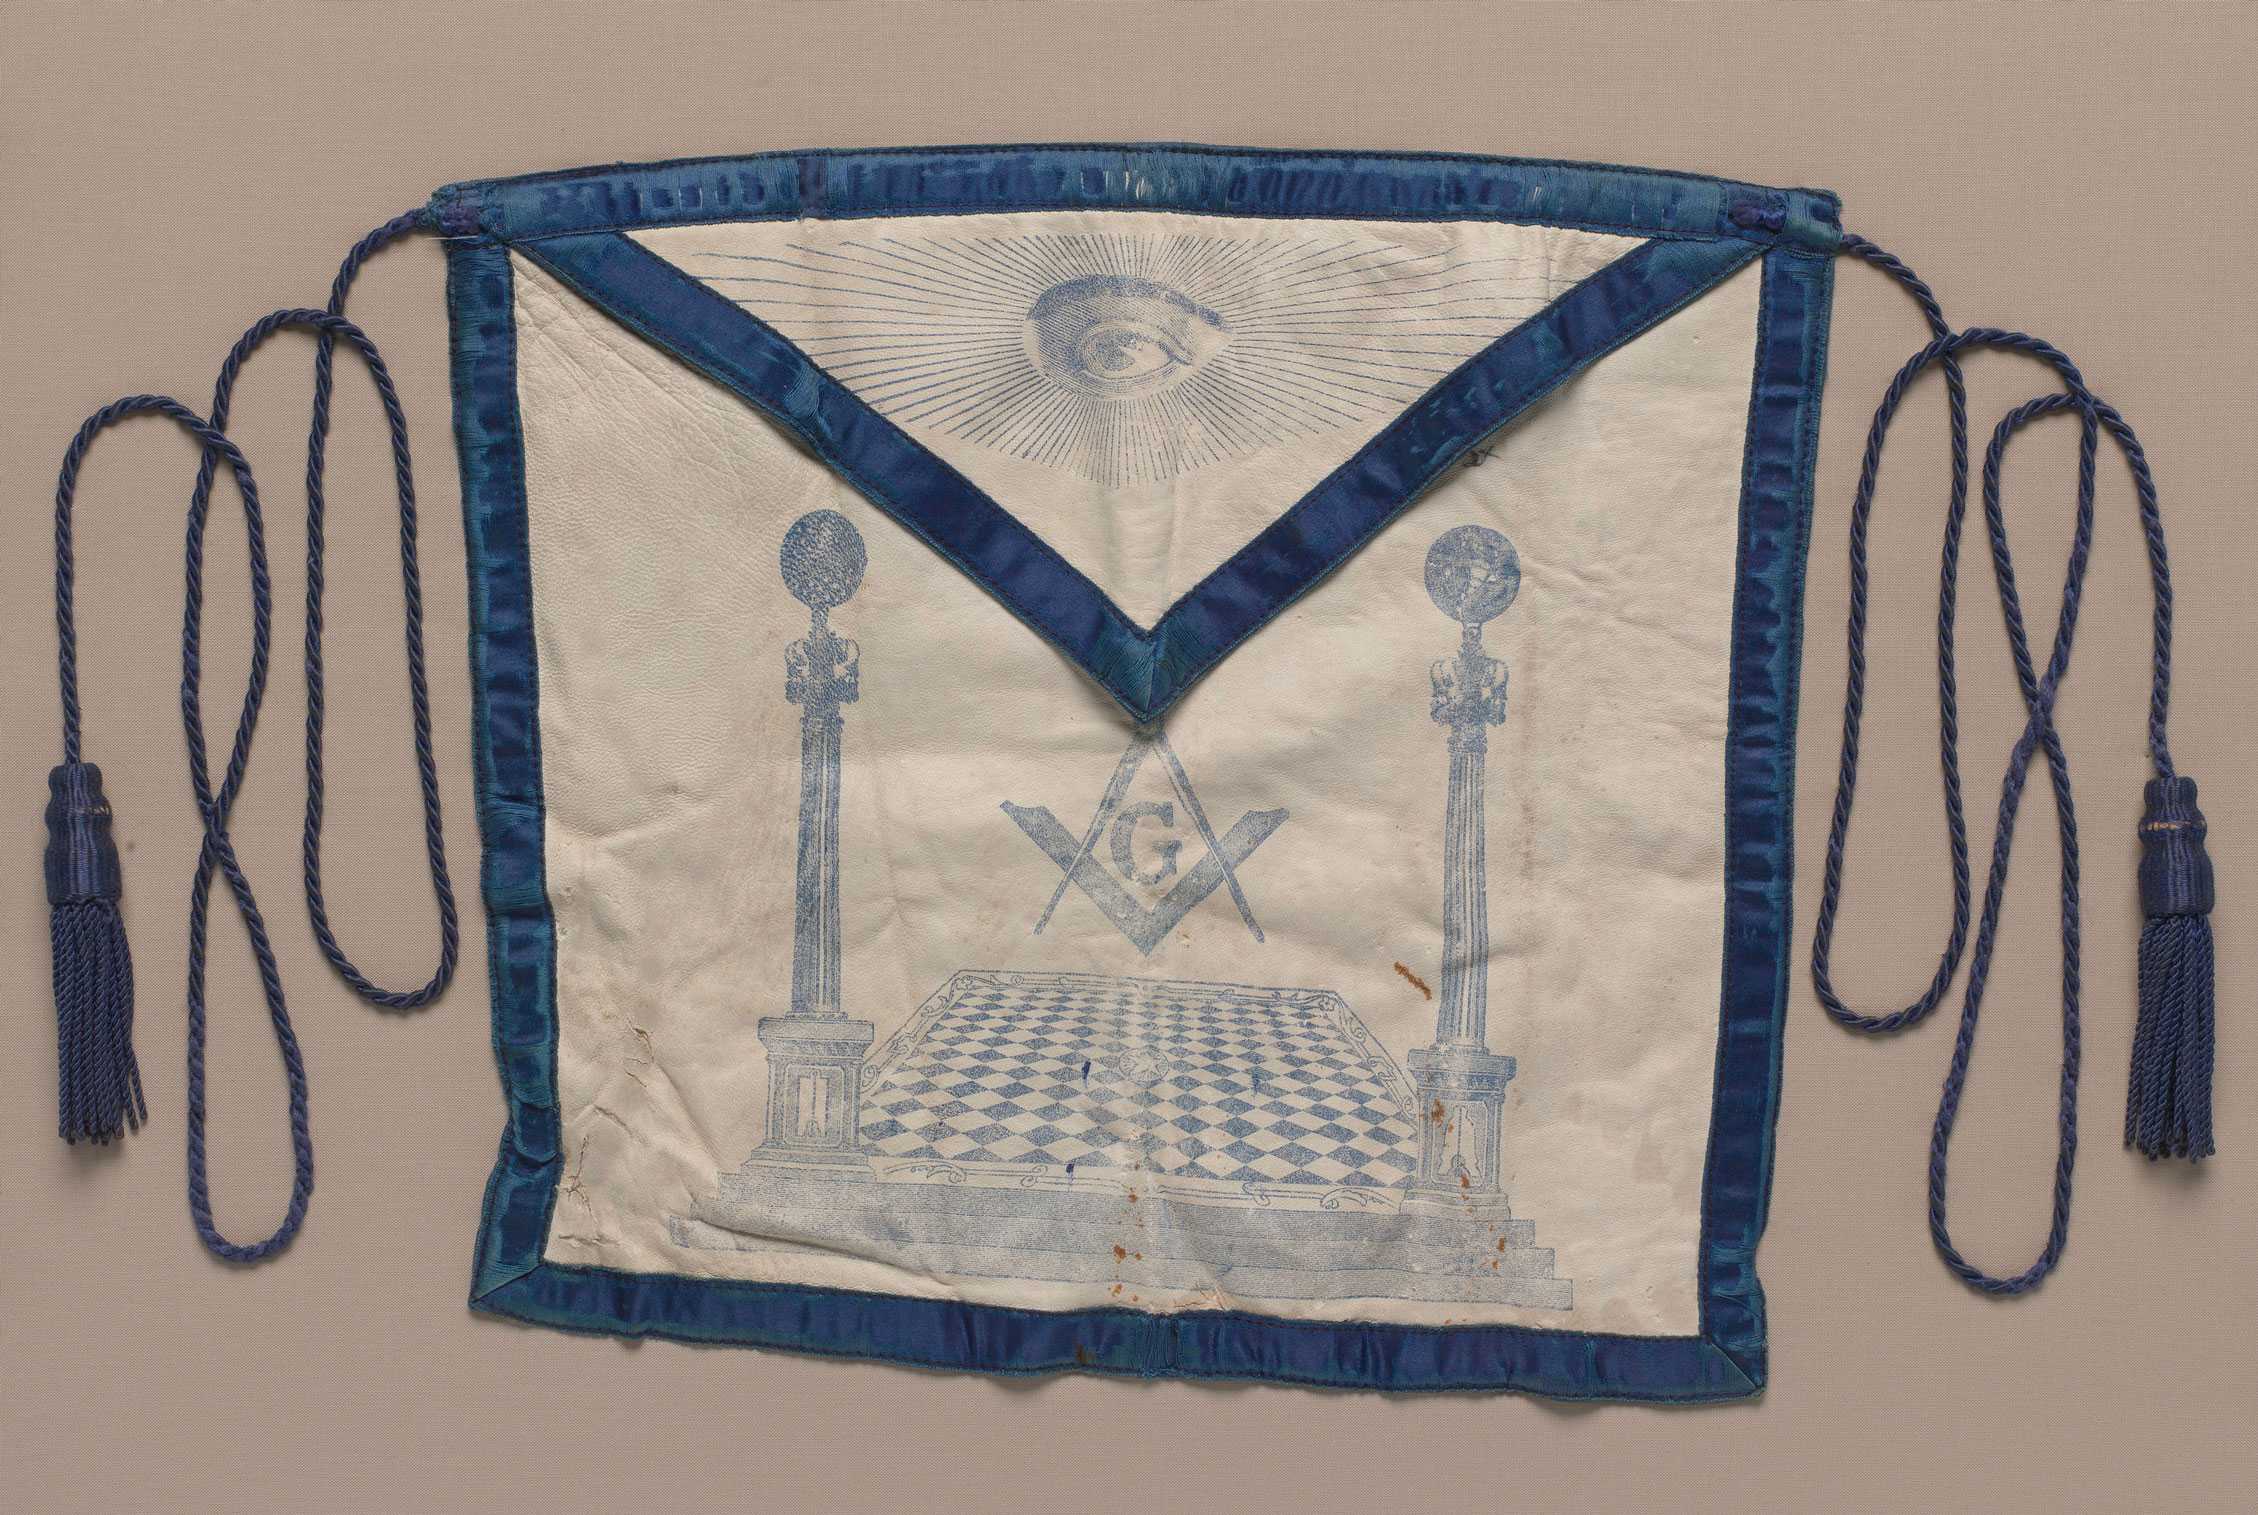 A blue trimmed Masonic apron with two tassels and a print of an eye and open hall.